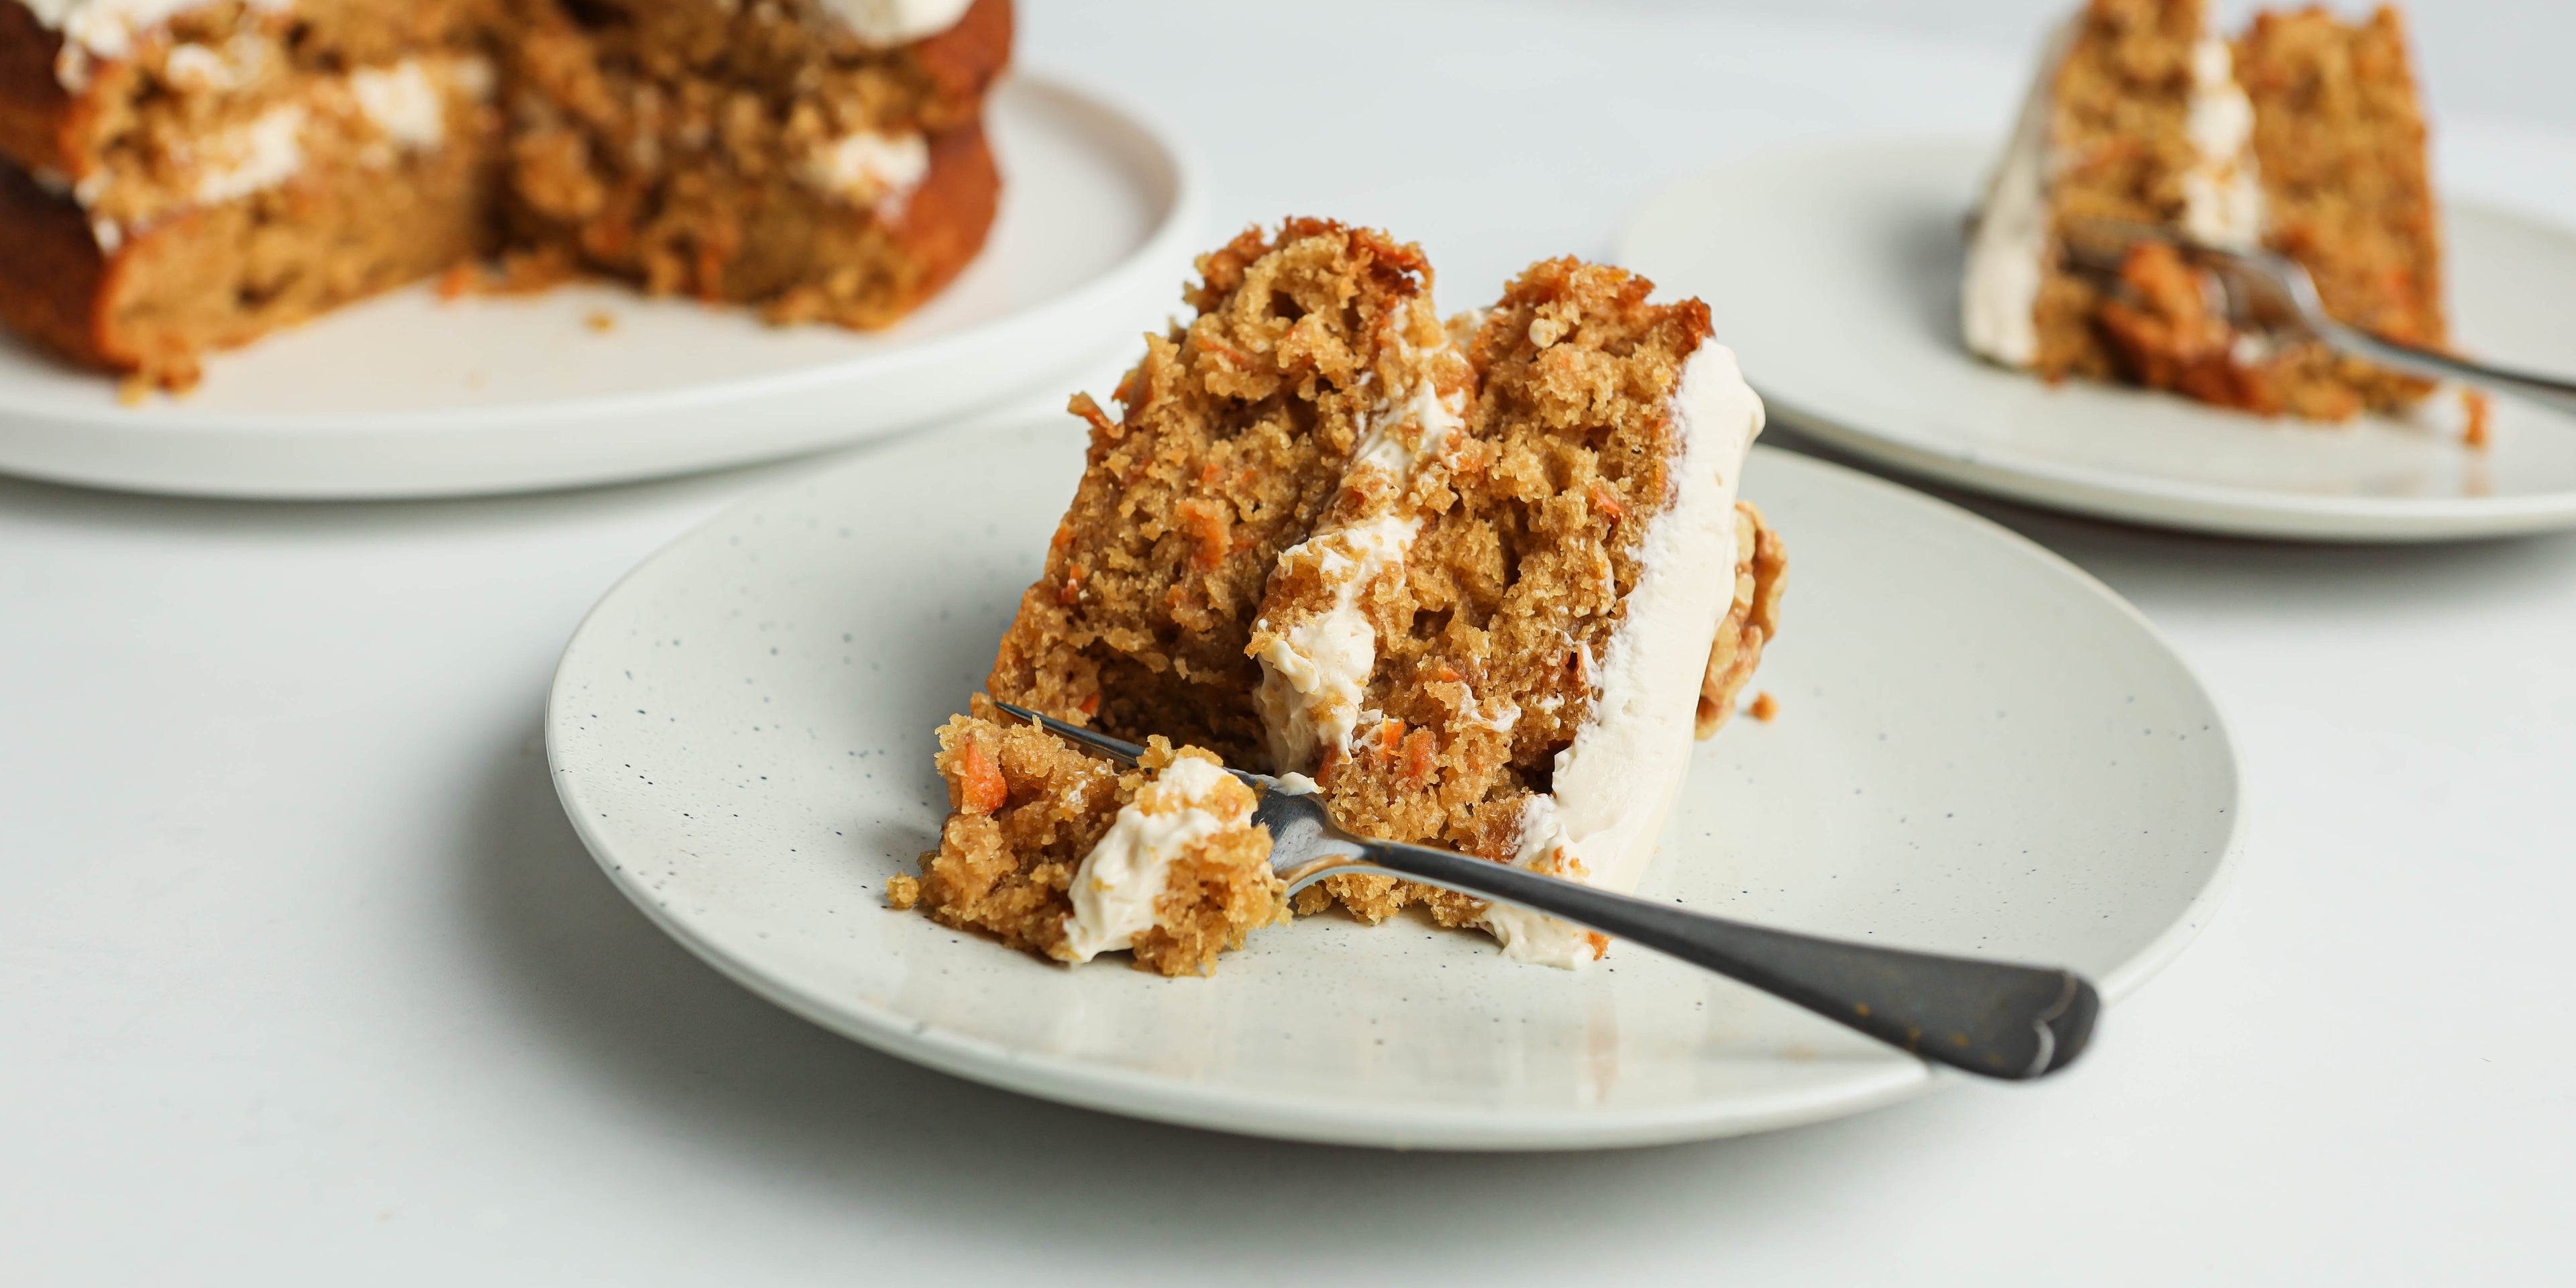 Slice of carrot cake with layers of mascarpone cheese frosting